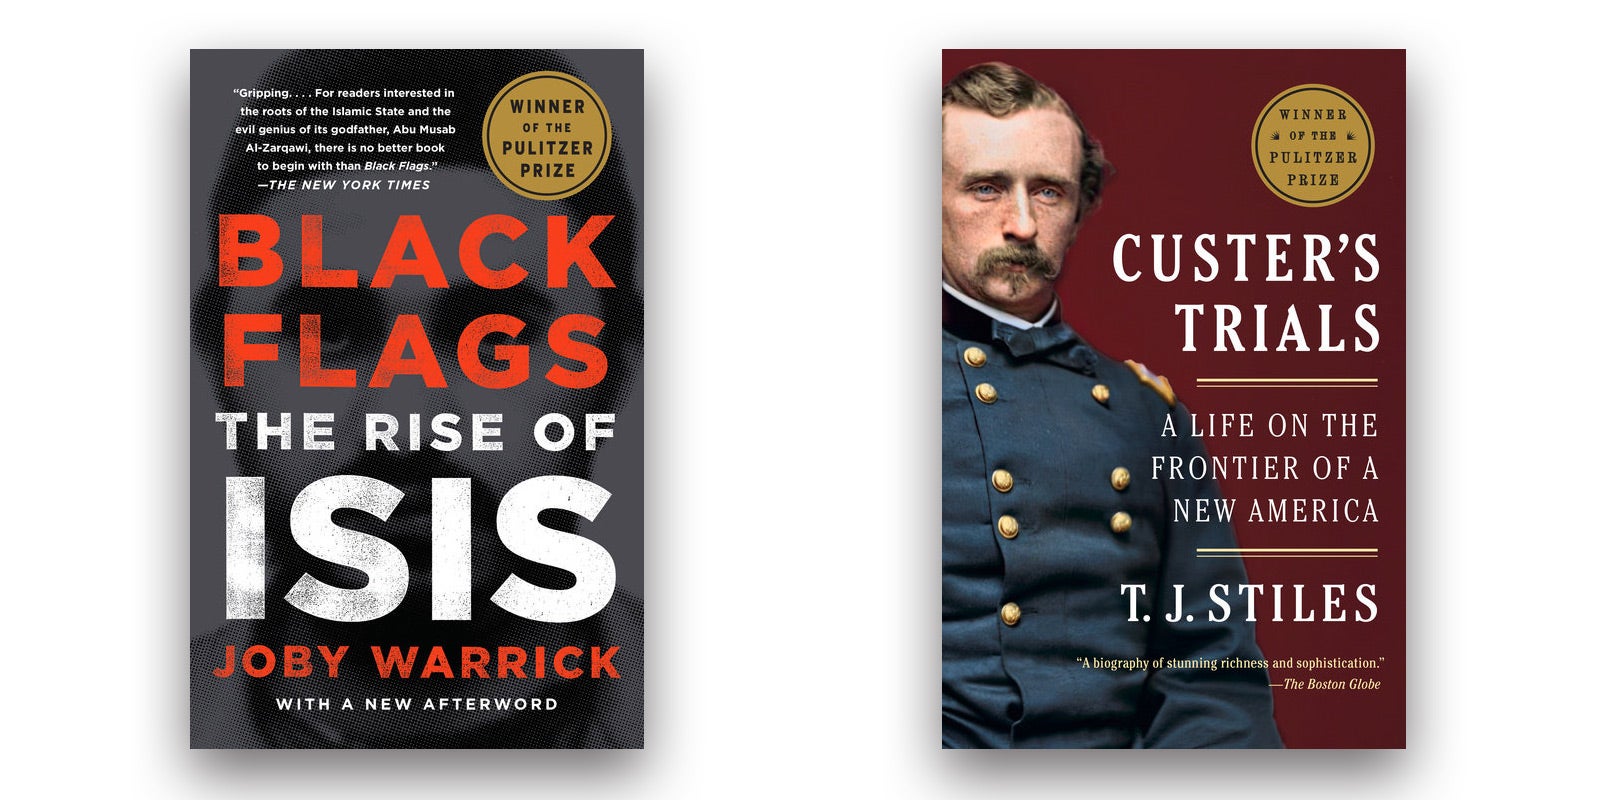 Custer’s Trials and Black Flags win 2016 Pulitzer Prizes